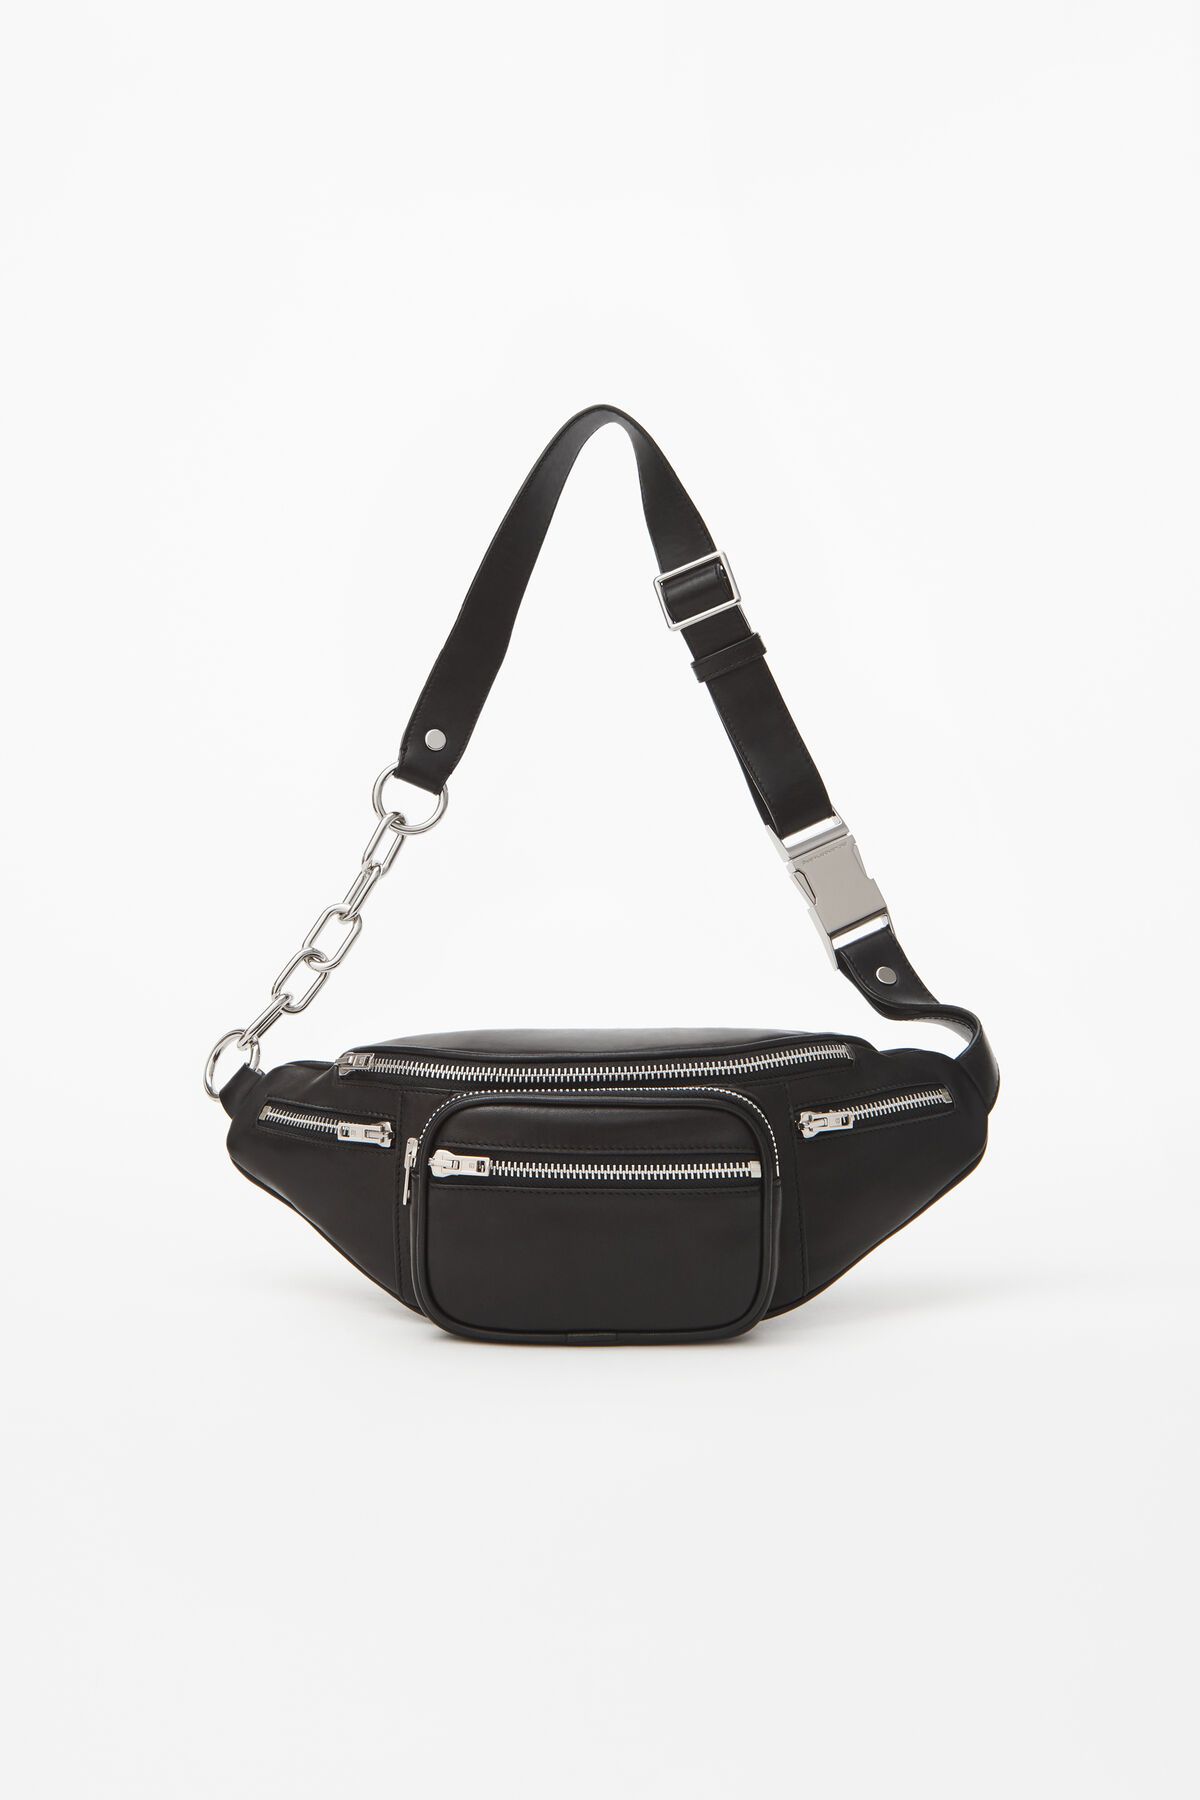 ATTICA FANNY PACK IN NAPPA LEATHER | Alexander Wang APAC